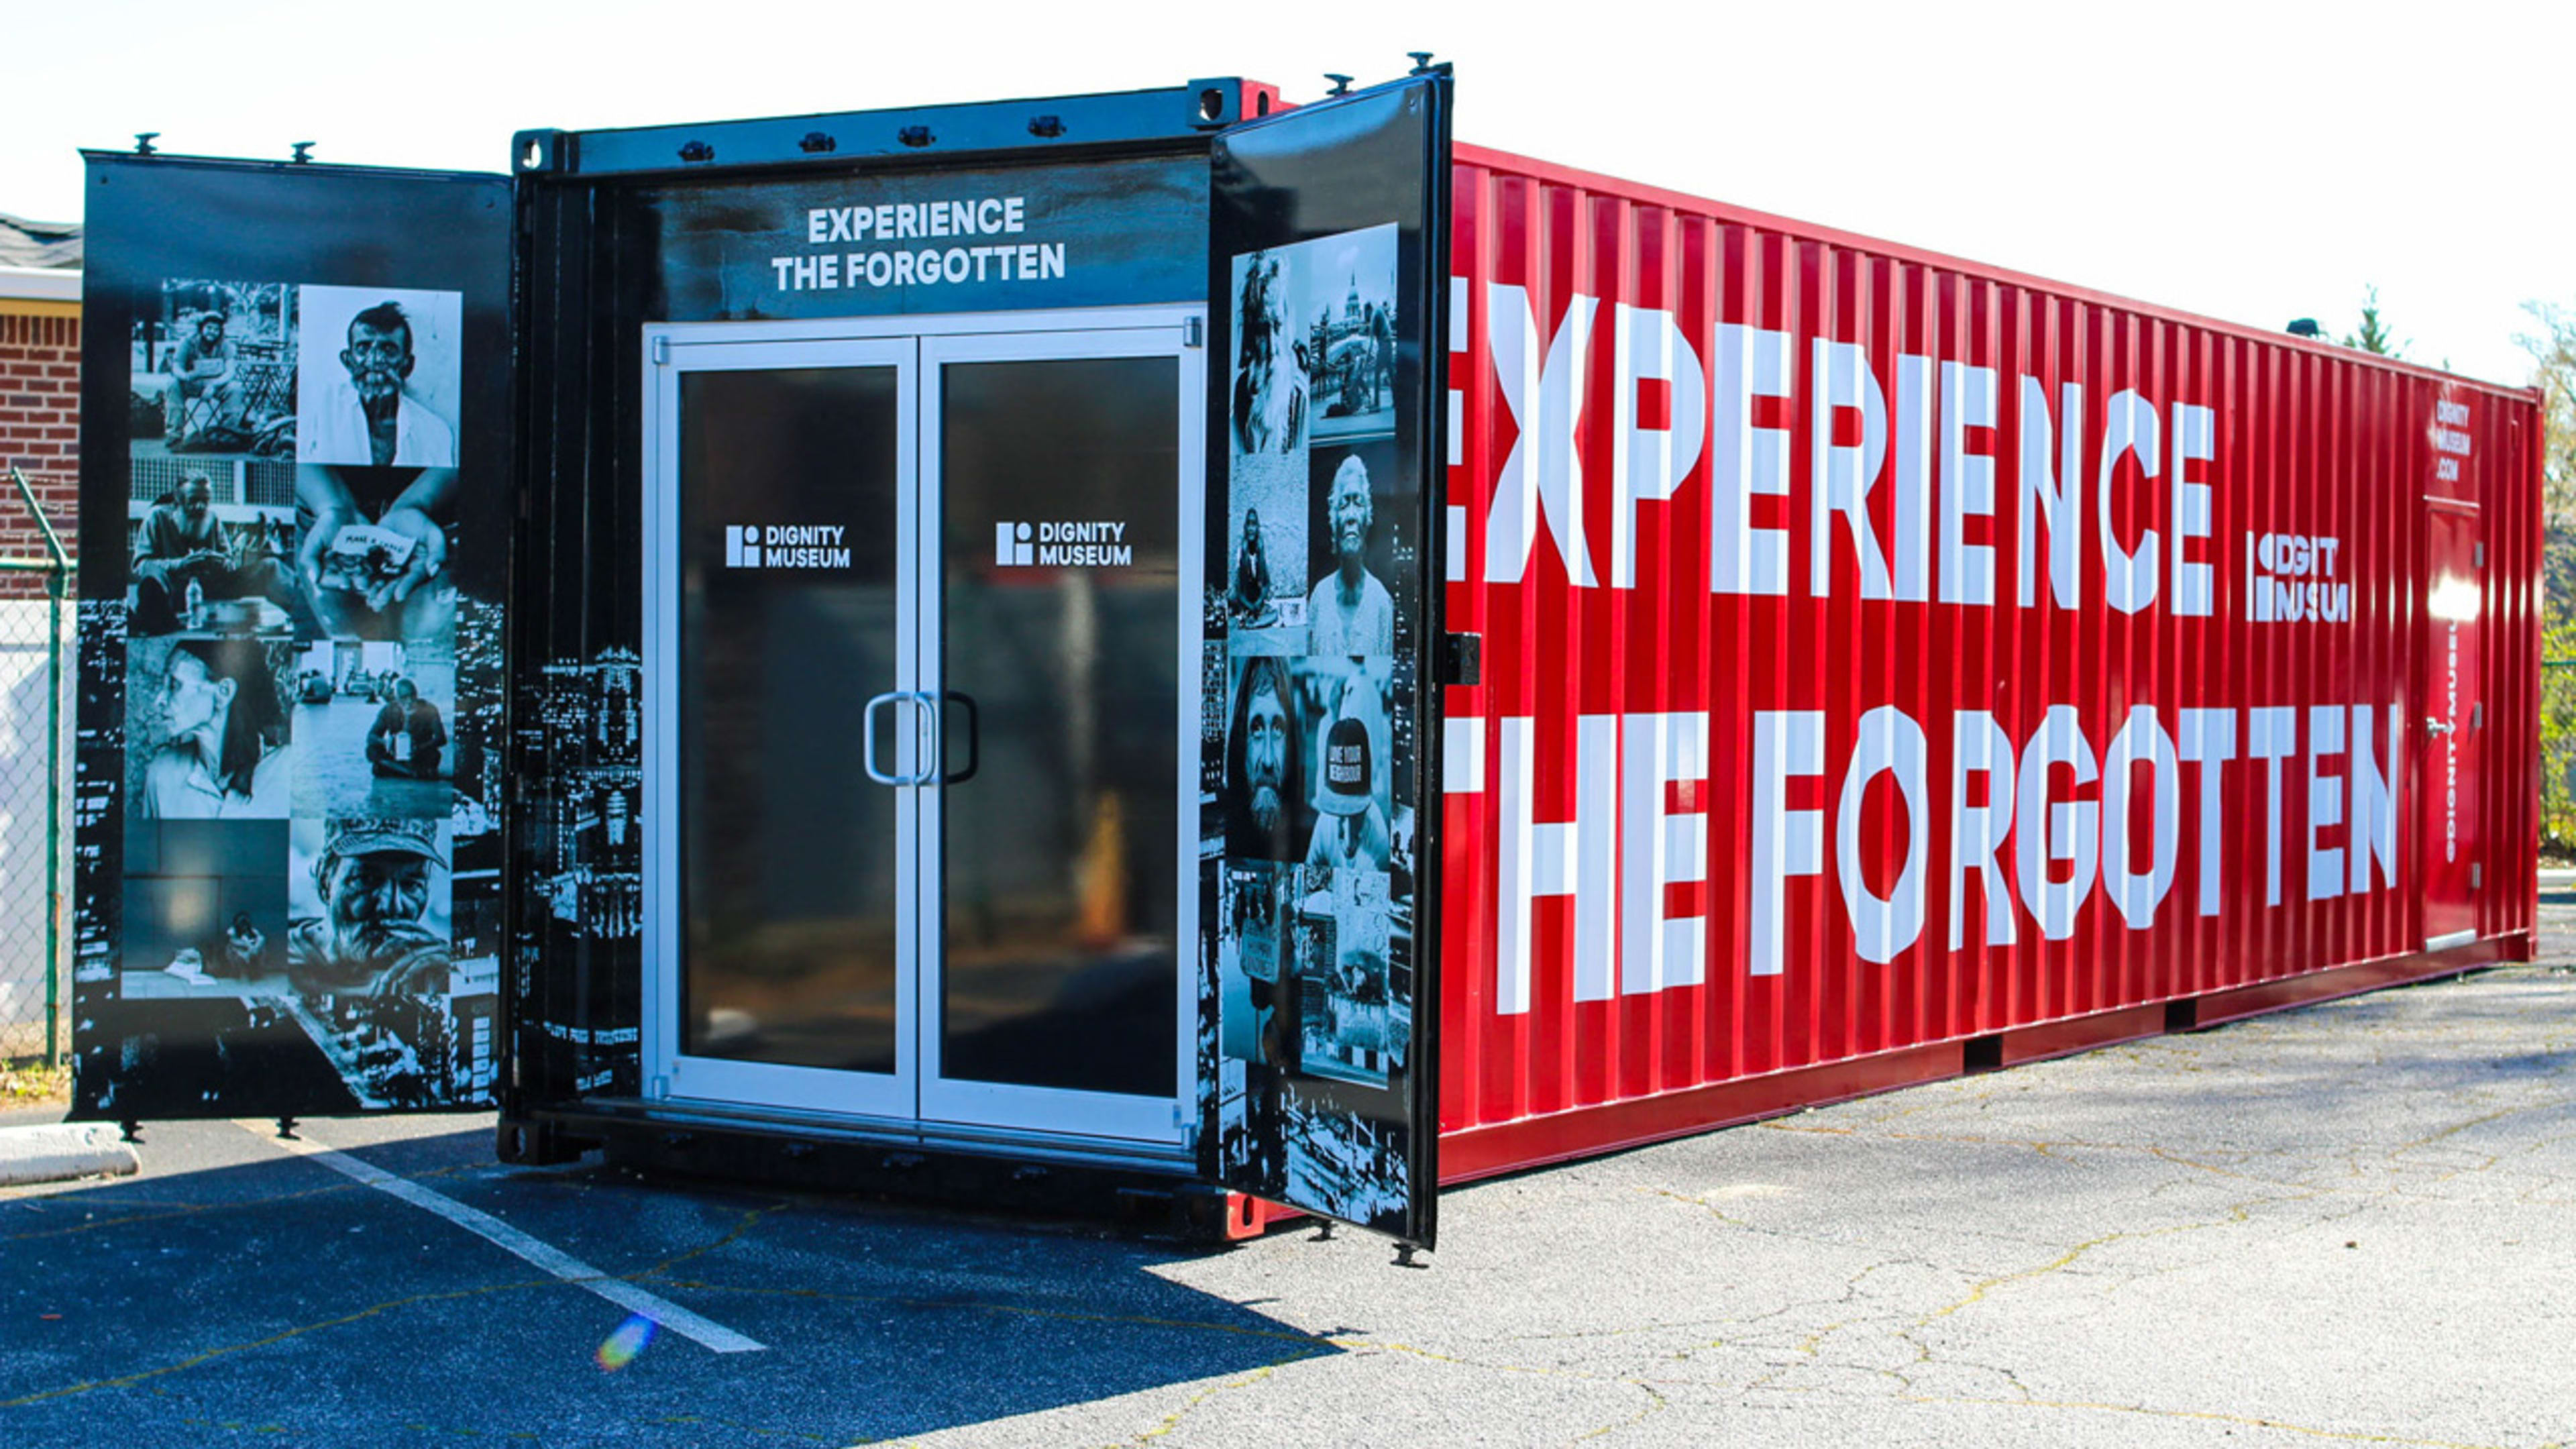 The Dignity Museum builds empathy between visitors and the homeless